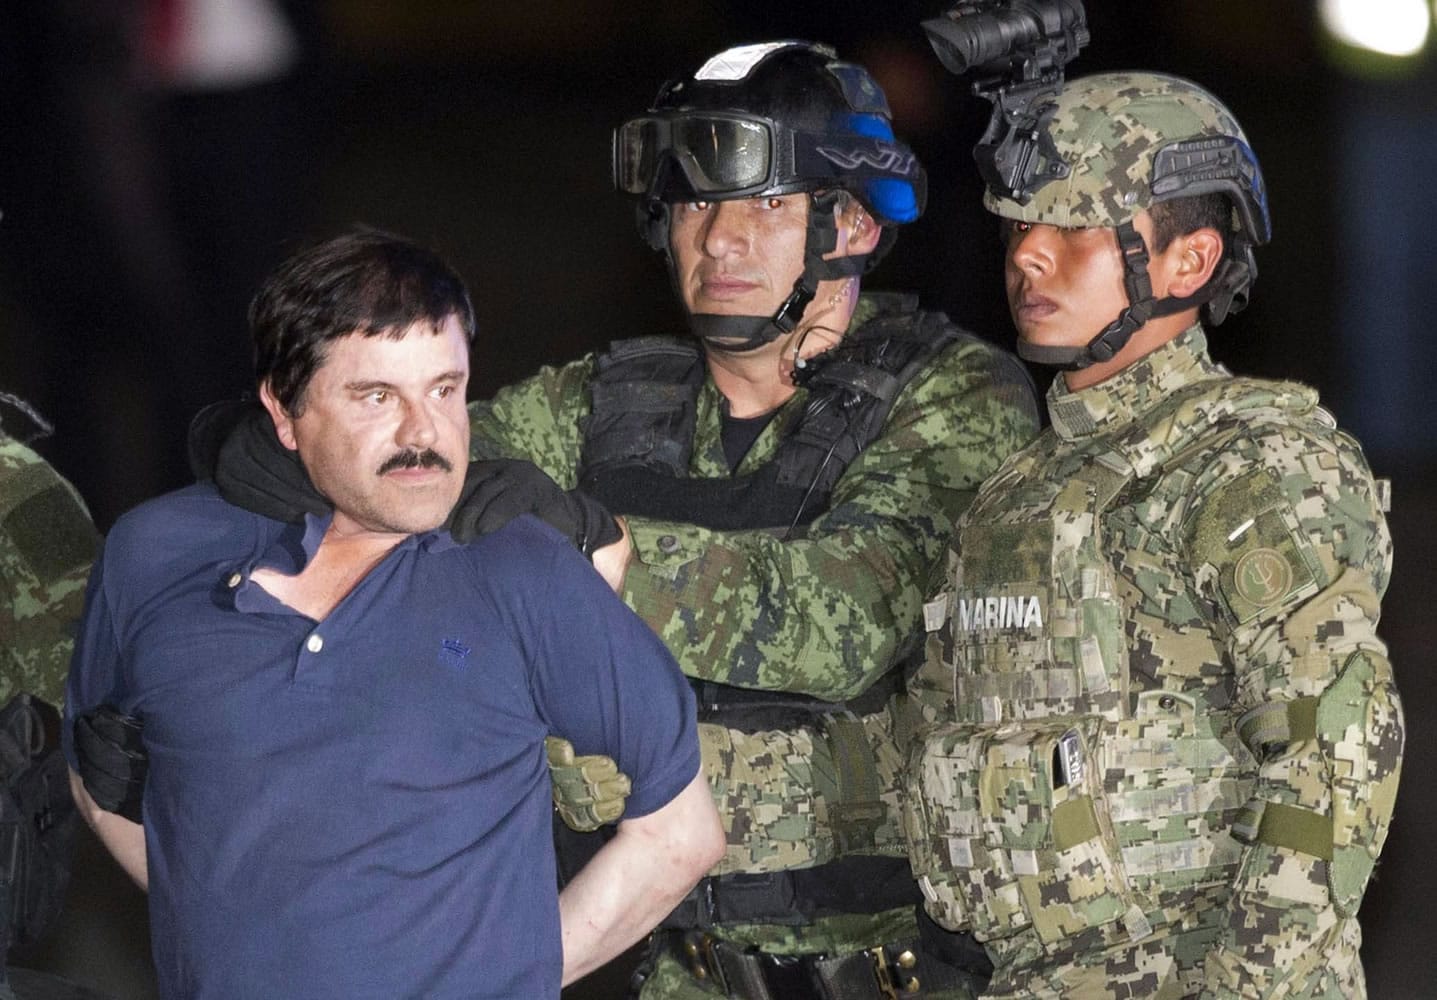 Joaquin "El Chapo" Guzman is made to face the press as he is escorted to a helicopter in handcuffs by Mexican soldiers and marines at a federal hangar in Mexico City, Mexico, Friday, Jan. 8, 2016. Mexican President Enrique Pena Nieto announced that Guzman had been recaptured six months after escaping from a maximum security prison.